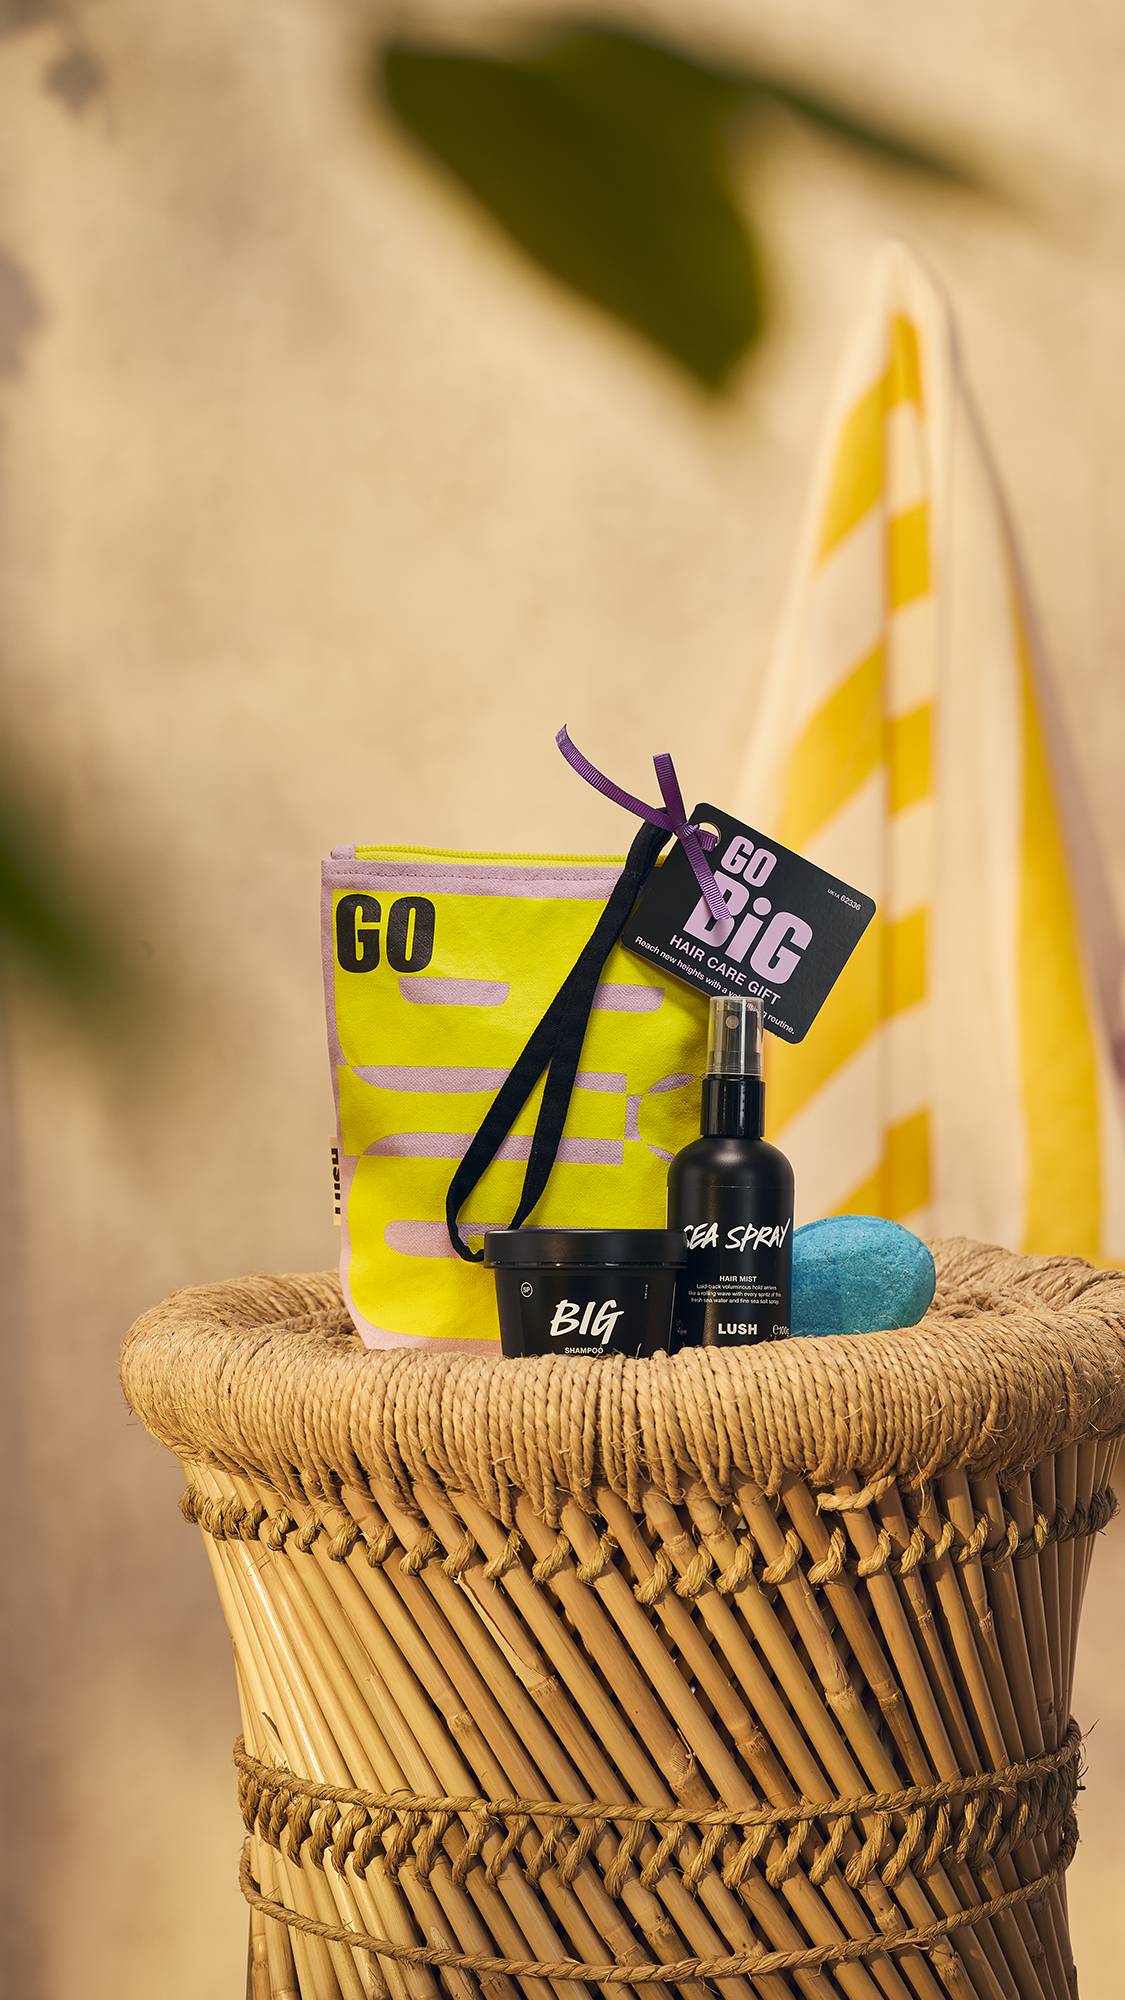 The image shows the Go Big pouch bag along with the three included haircare products sitting on top of a wicker hamper on a warm, earth-toned background. 